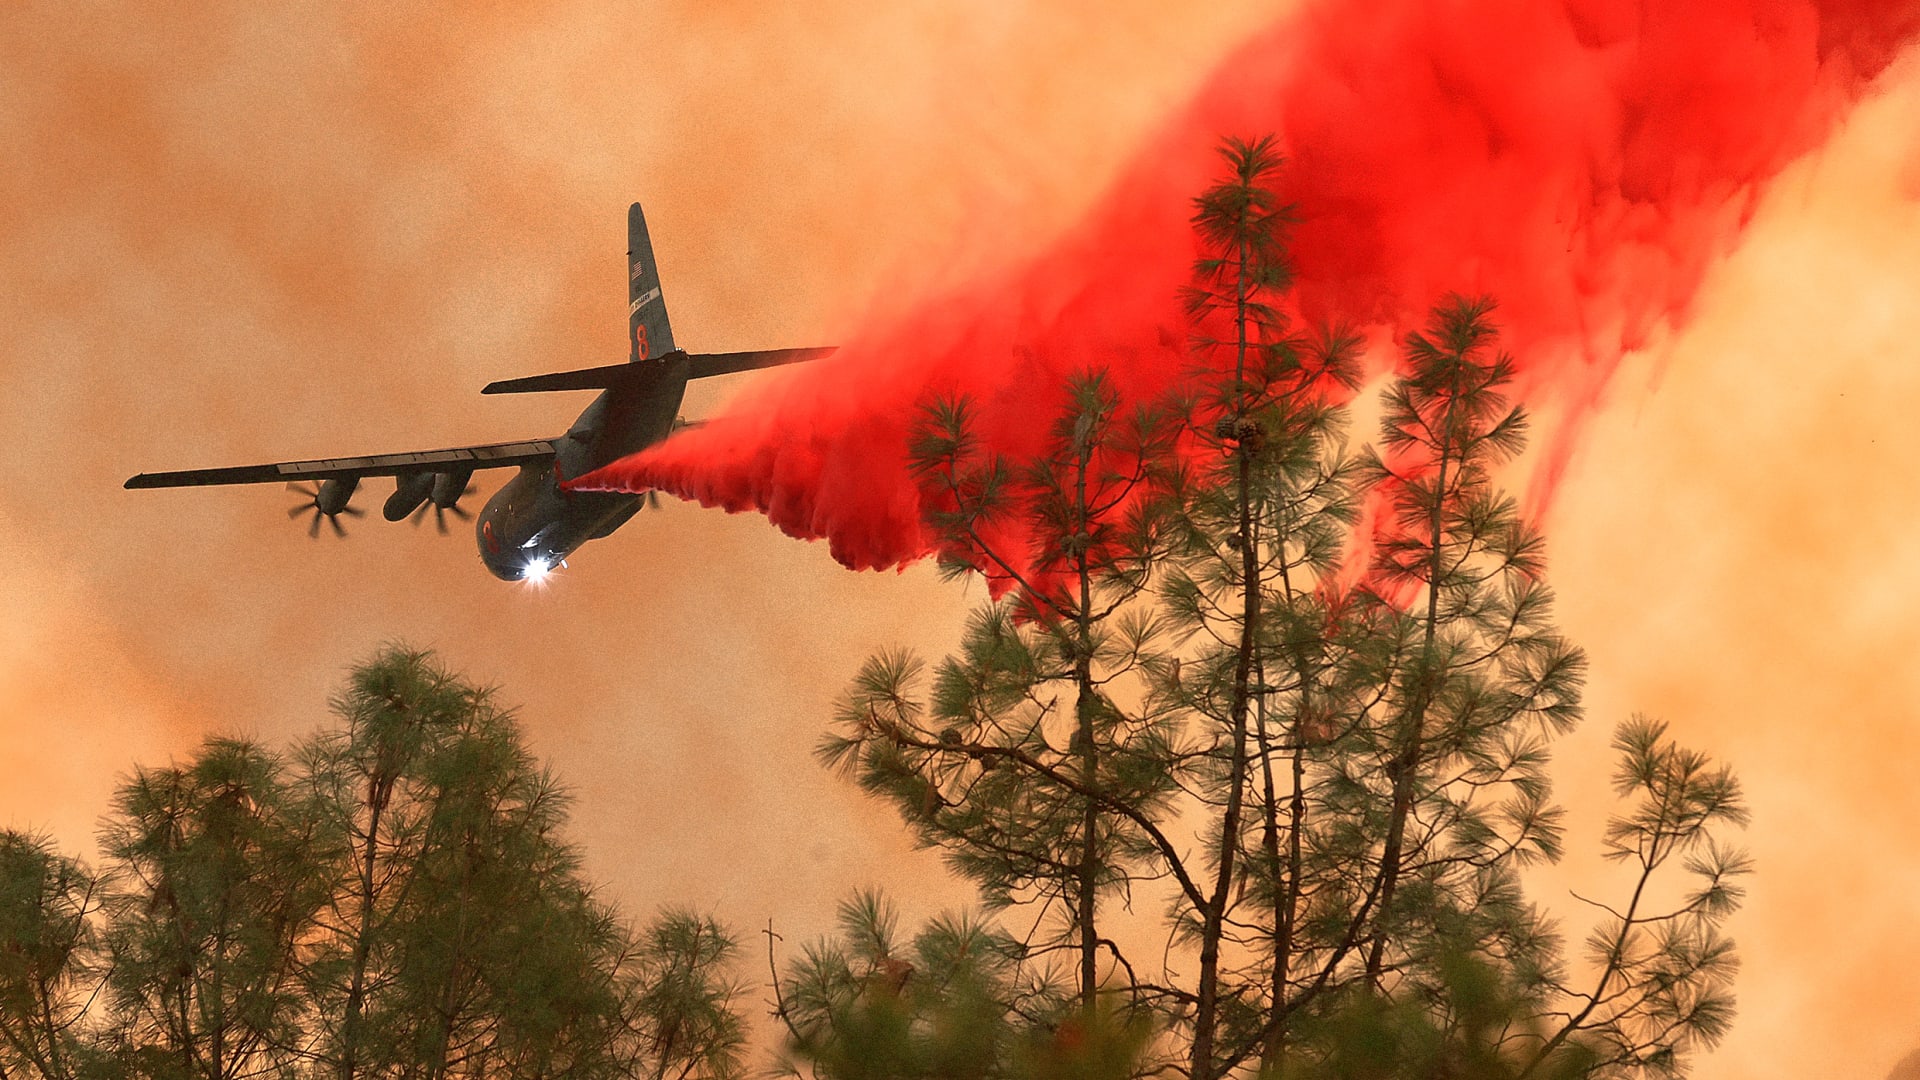 This tool is mapping every tree in California to help stop megafires